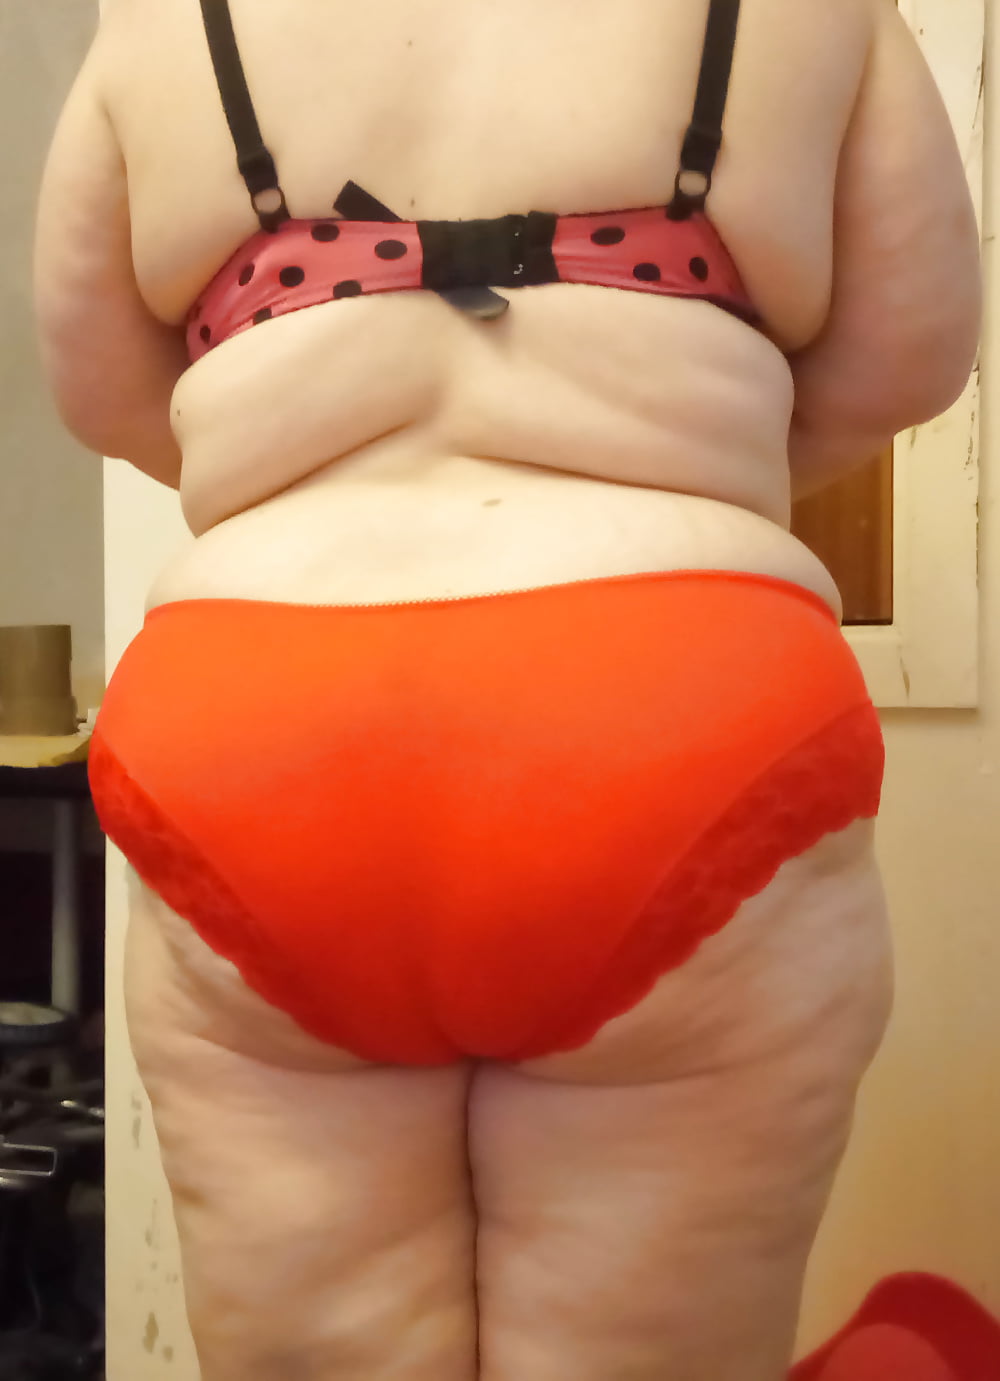 BBW Wife trying on knickers (panties) before first threesome (8/10)